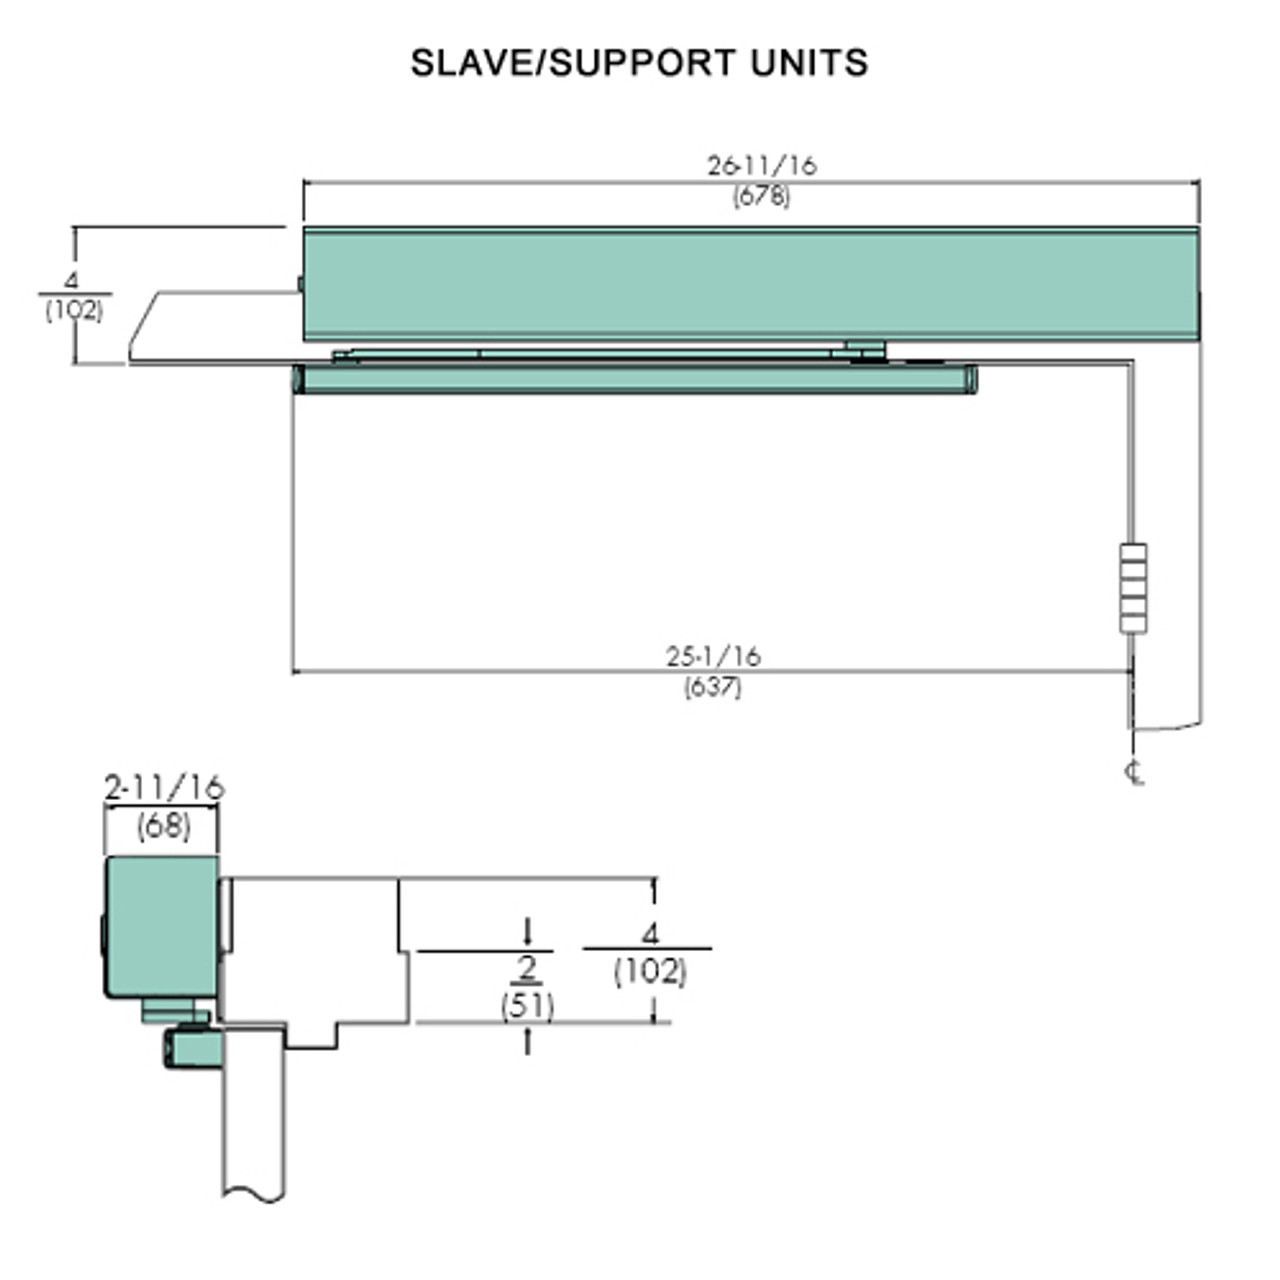 7215MPSO-LH-24VDC-690 Norton 7200 Series Electromechanical Closer and Holder with Rigid Arm Slide Track Slave/Support Unit in Statuary Bronze Finish